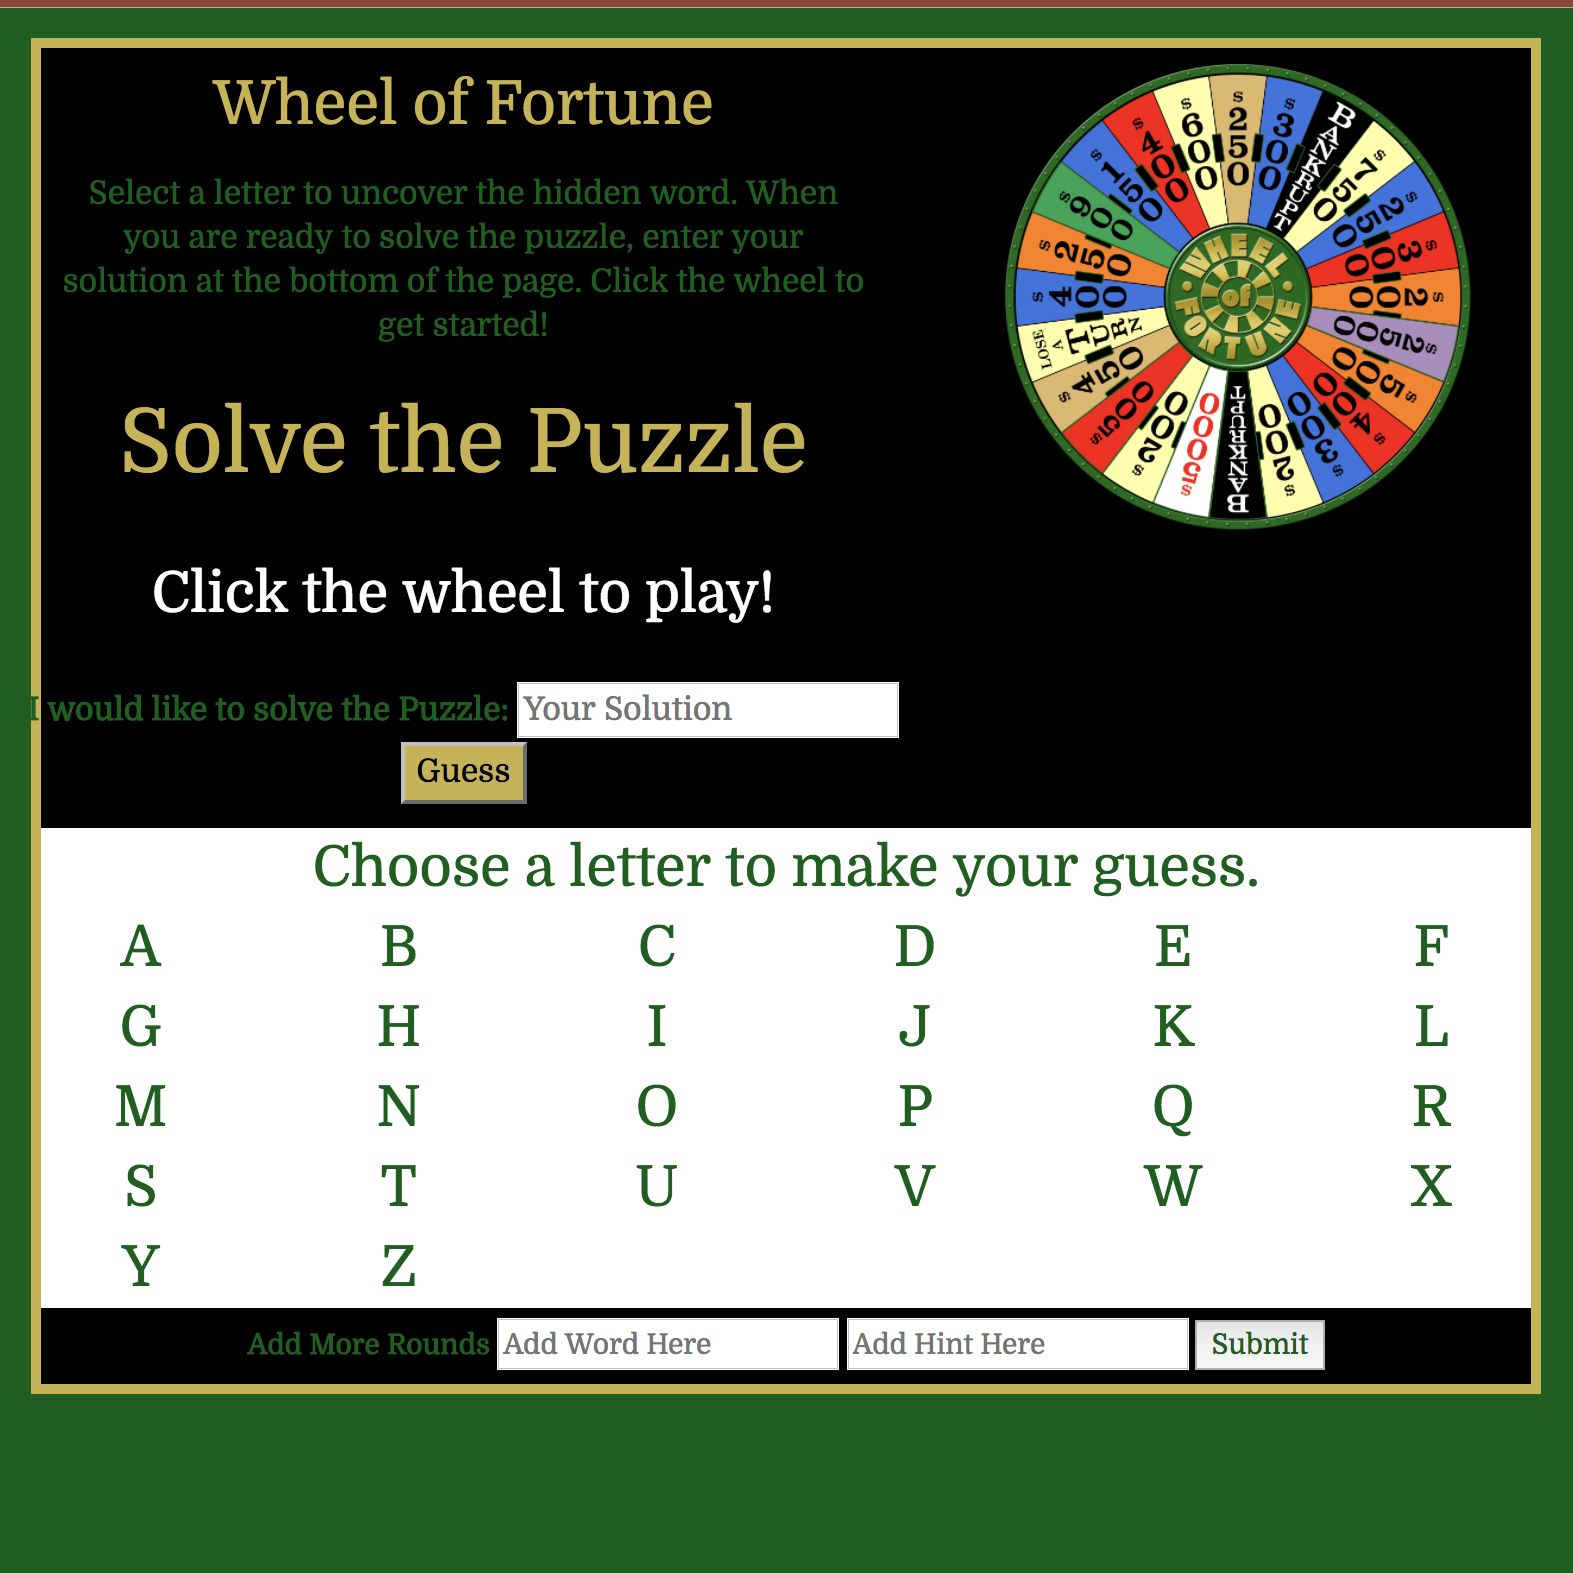 Wheel of Fortune Project Image